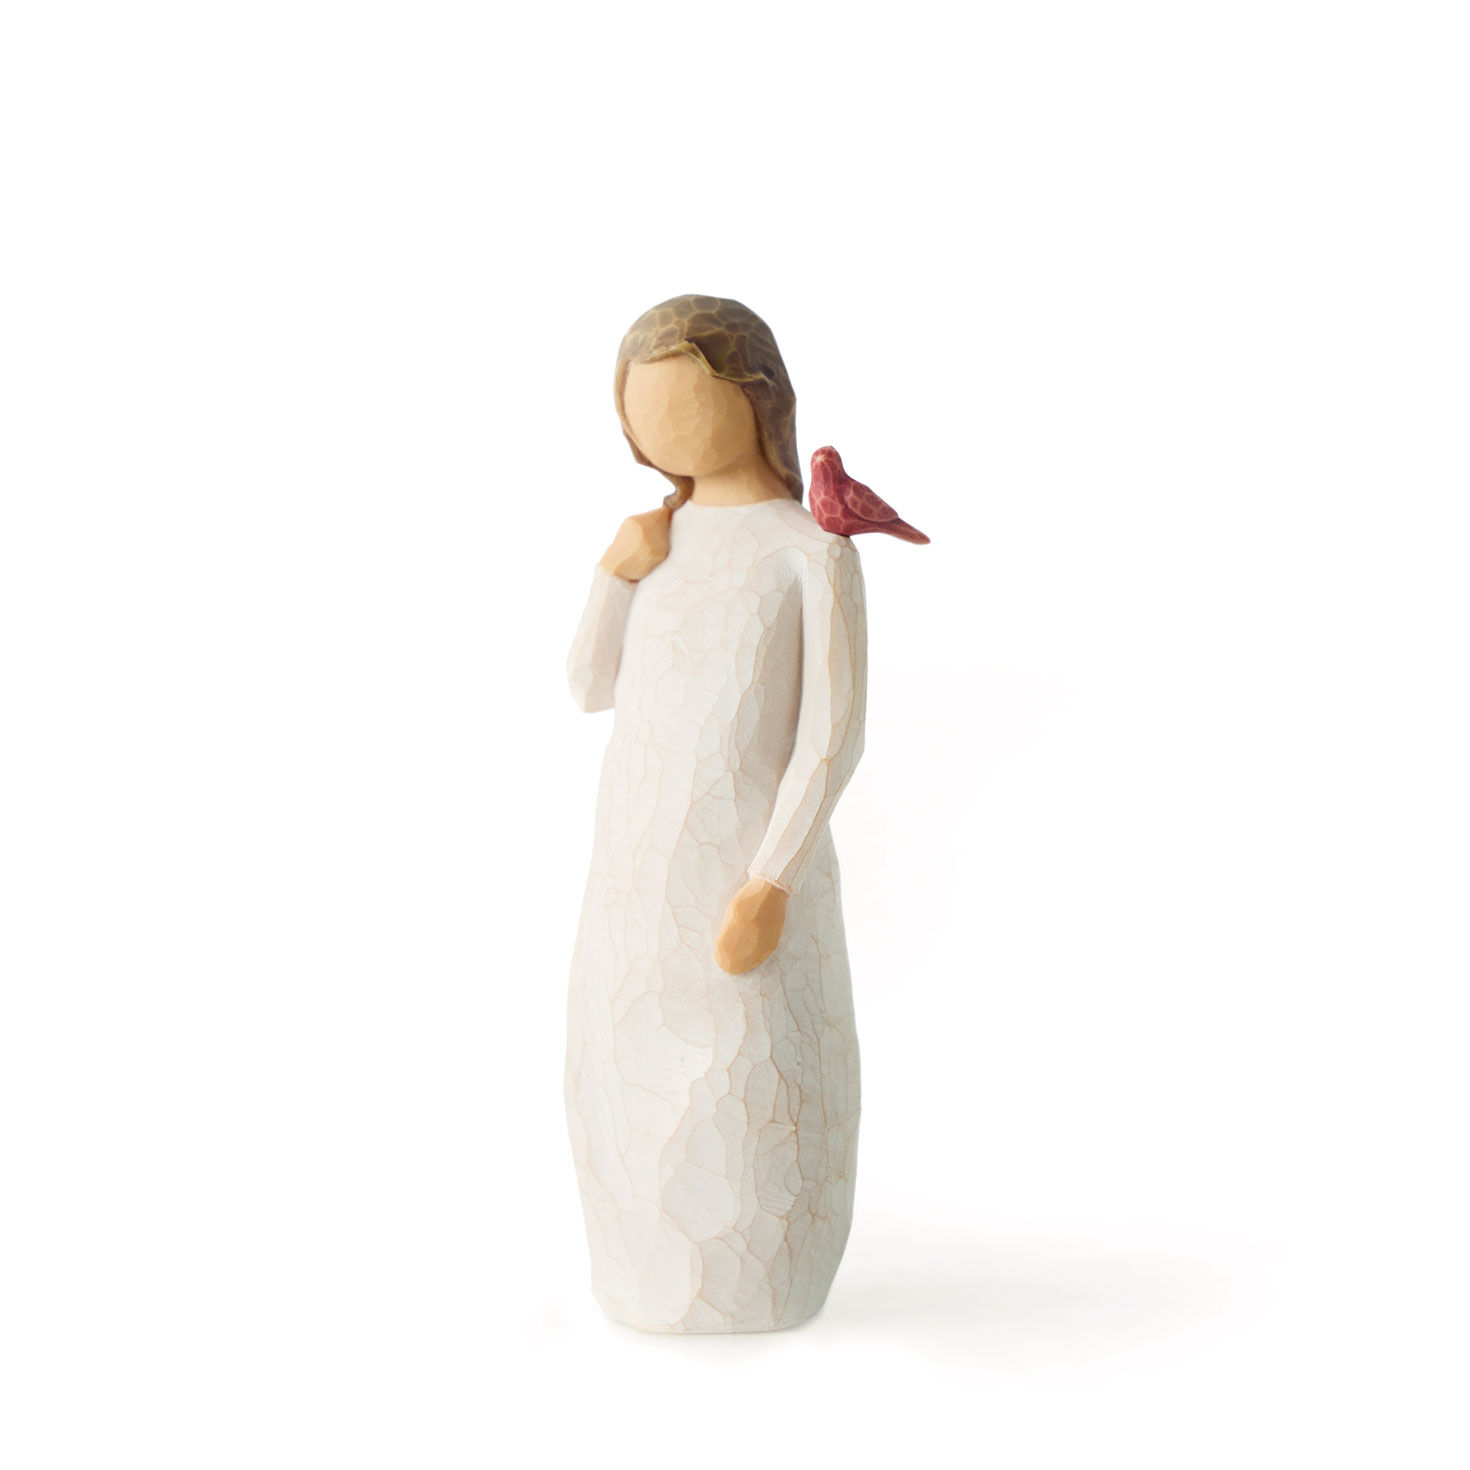 https://www.hallmark.com/dw/image/v2/AALB_PRD/on/demandware.static/-/Sites-hallmark-master/default/dwa51f3377/images/finished-goods/products/28236/Willow-Tree-Girl-and-Cardinal-Figurine_28236_01.jpg?sfrm=jpg